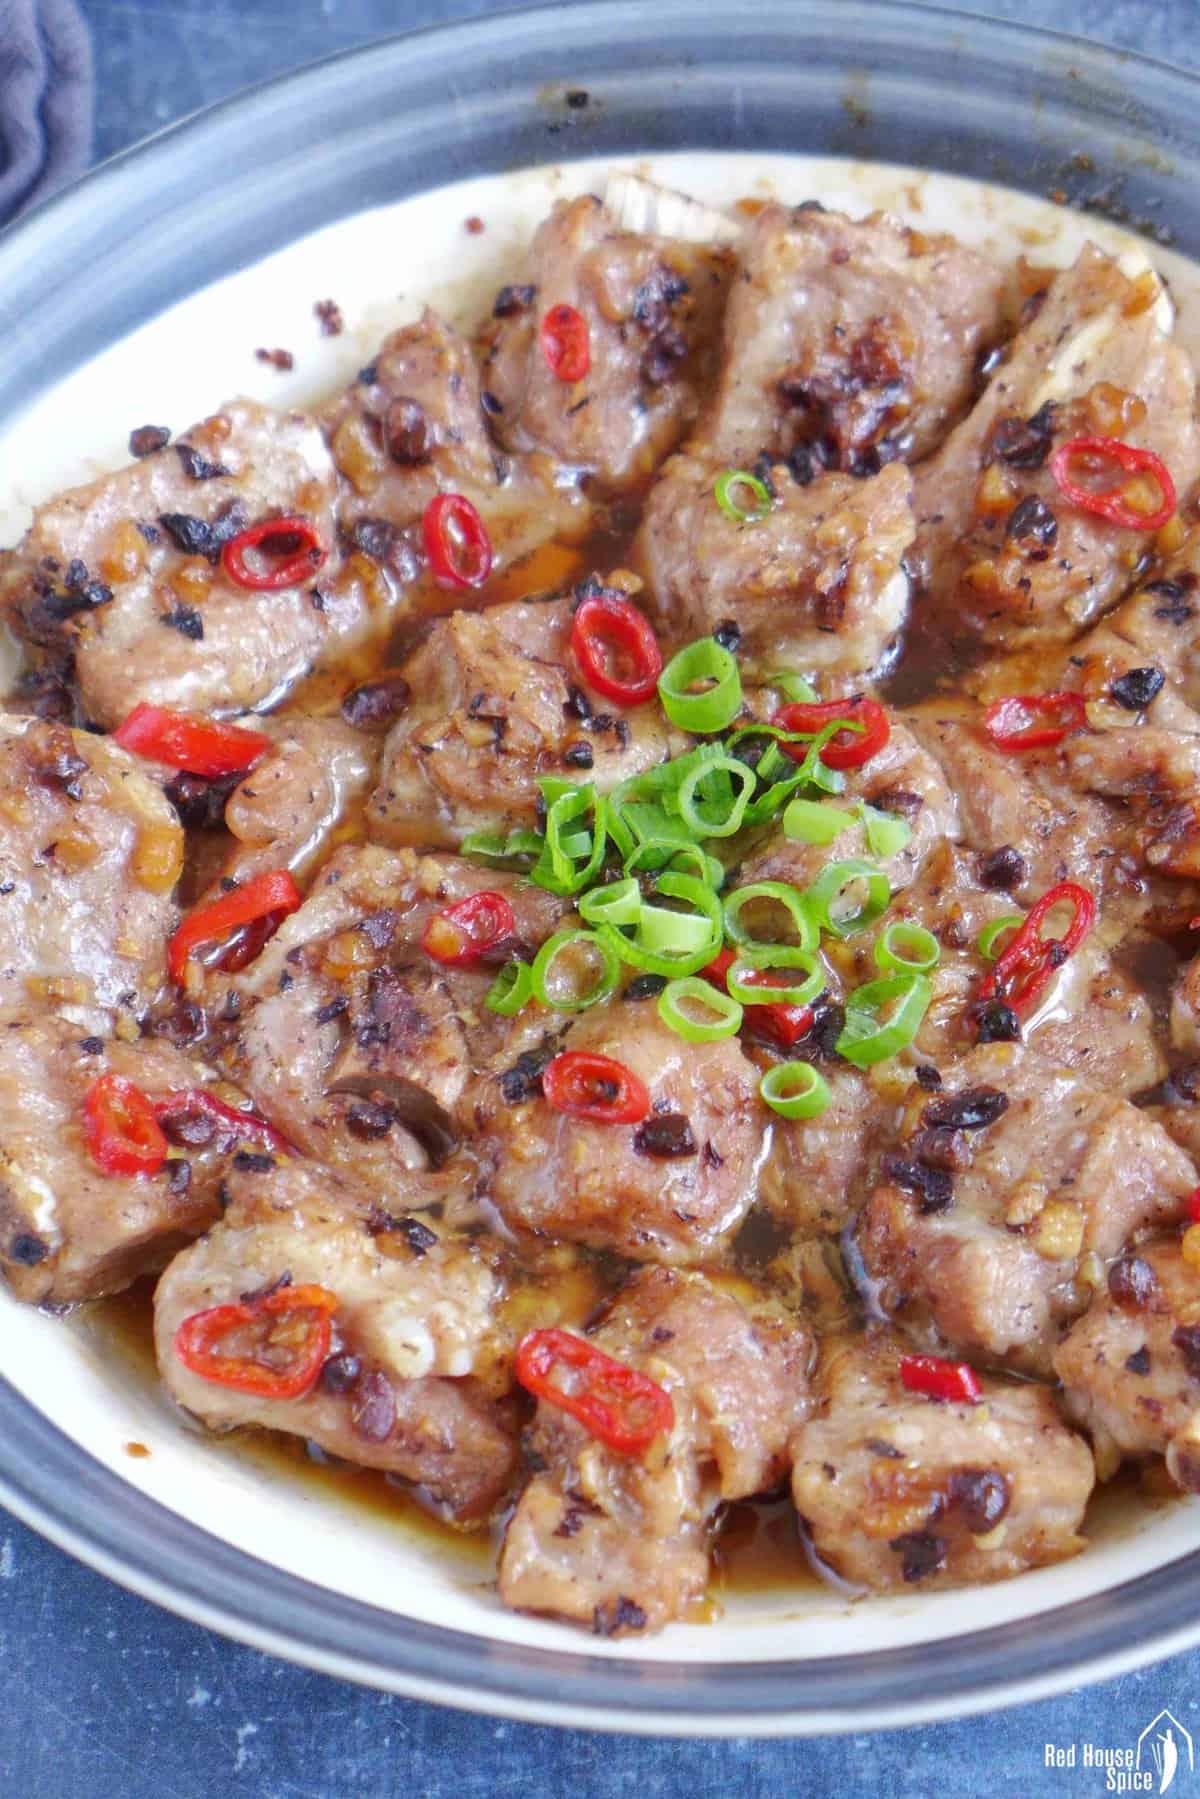 a plate of steamed ribs with fermented black beans and chili pepper.